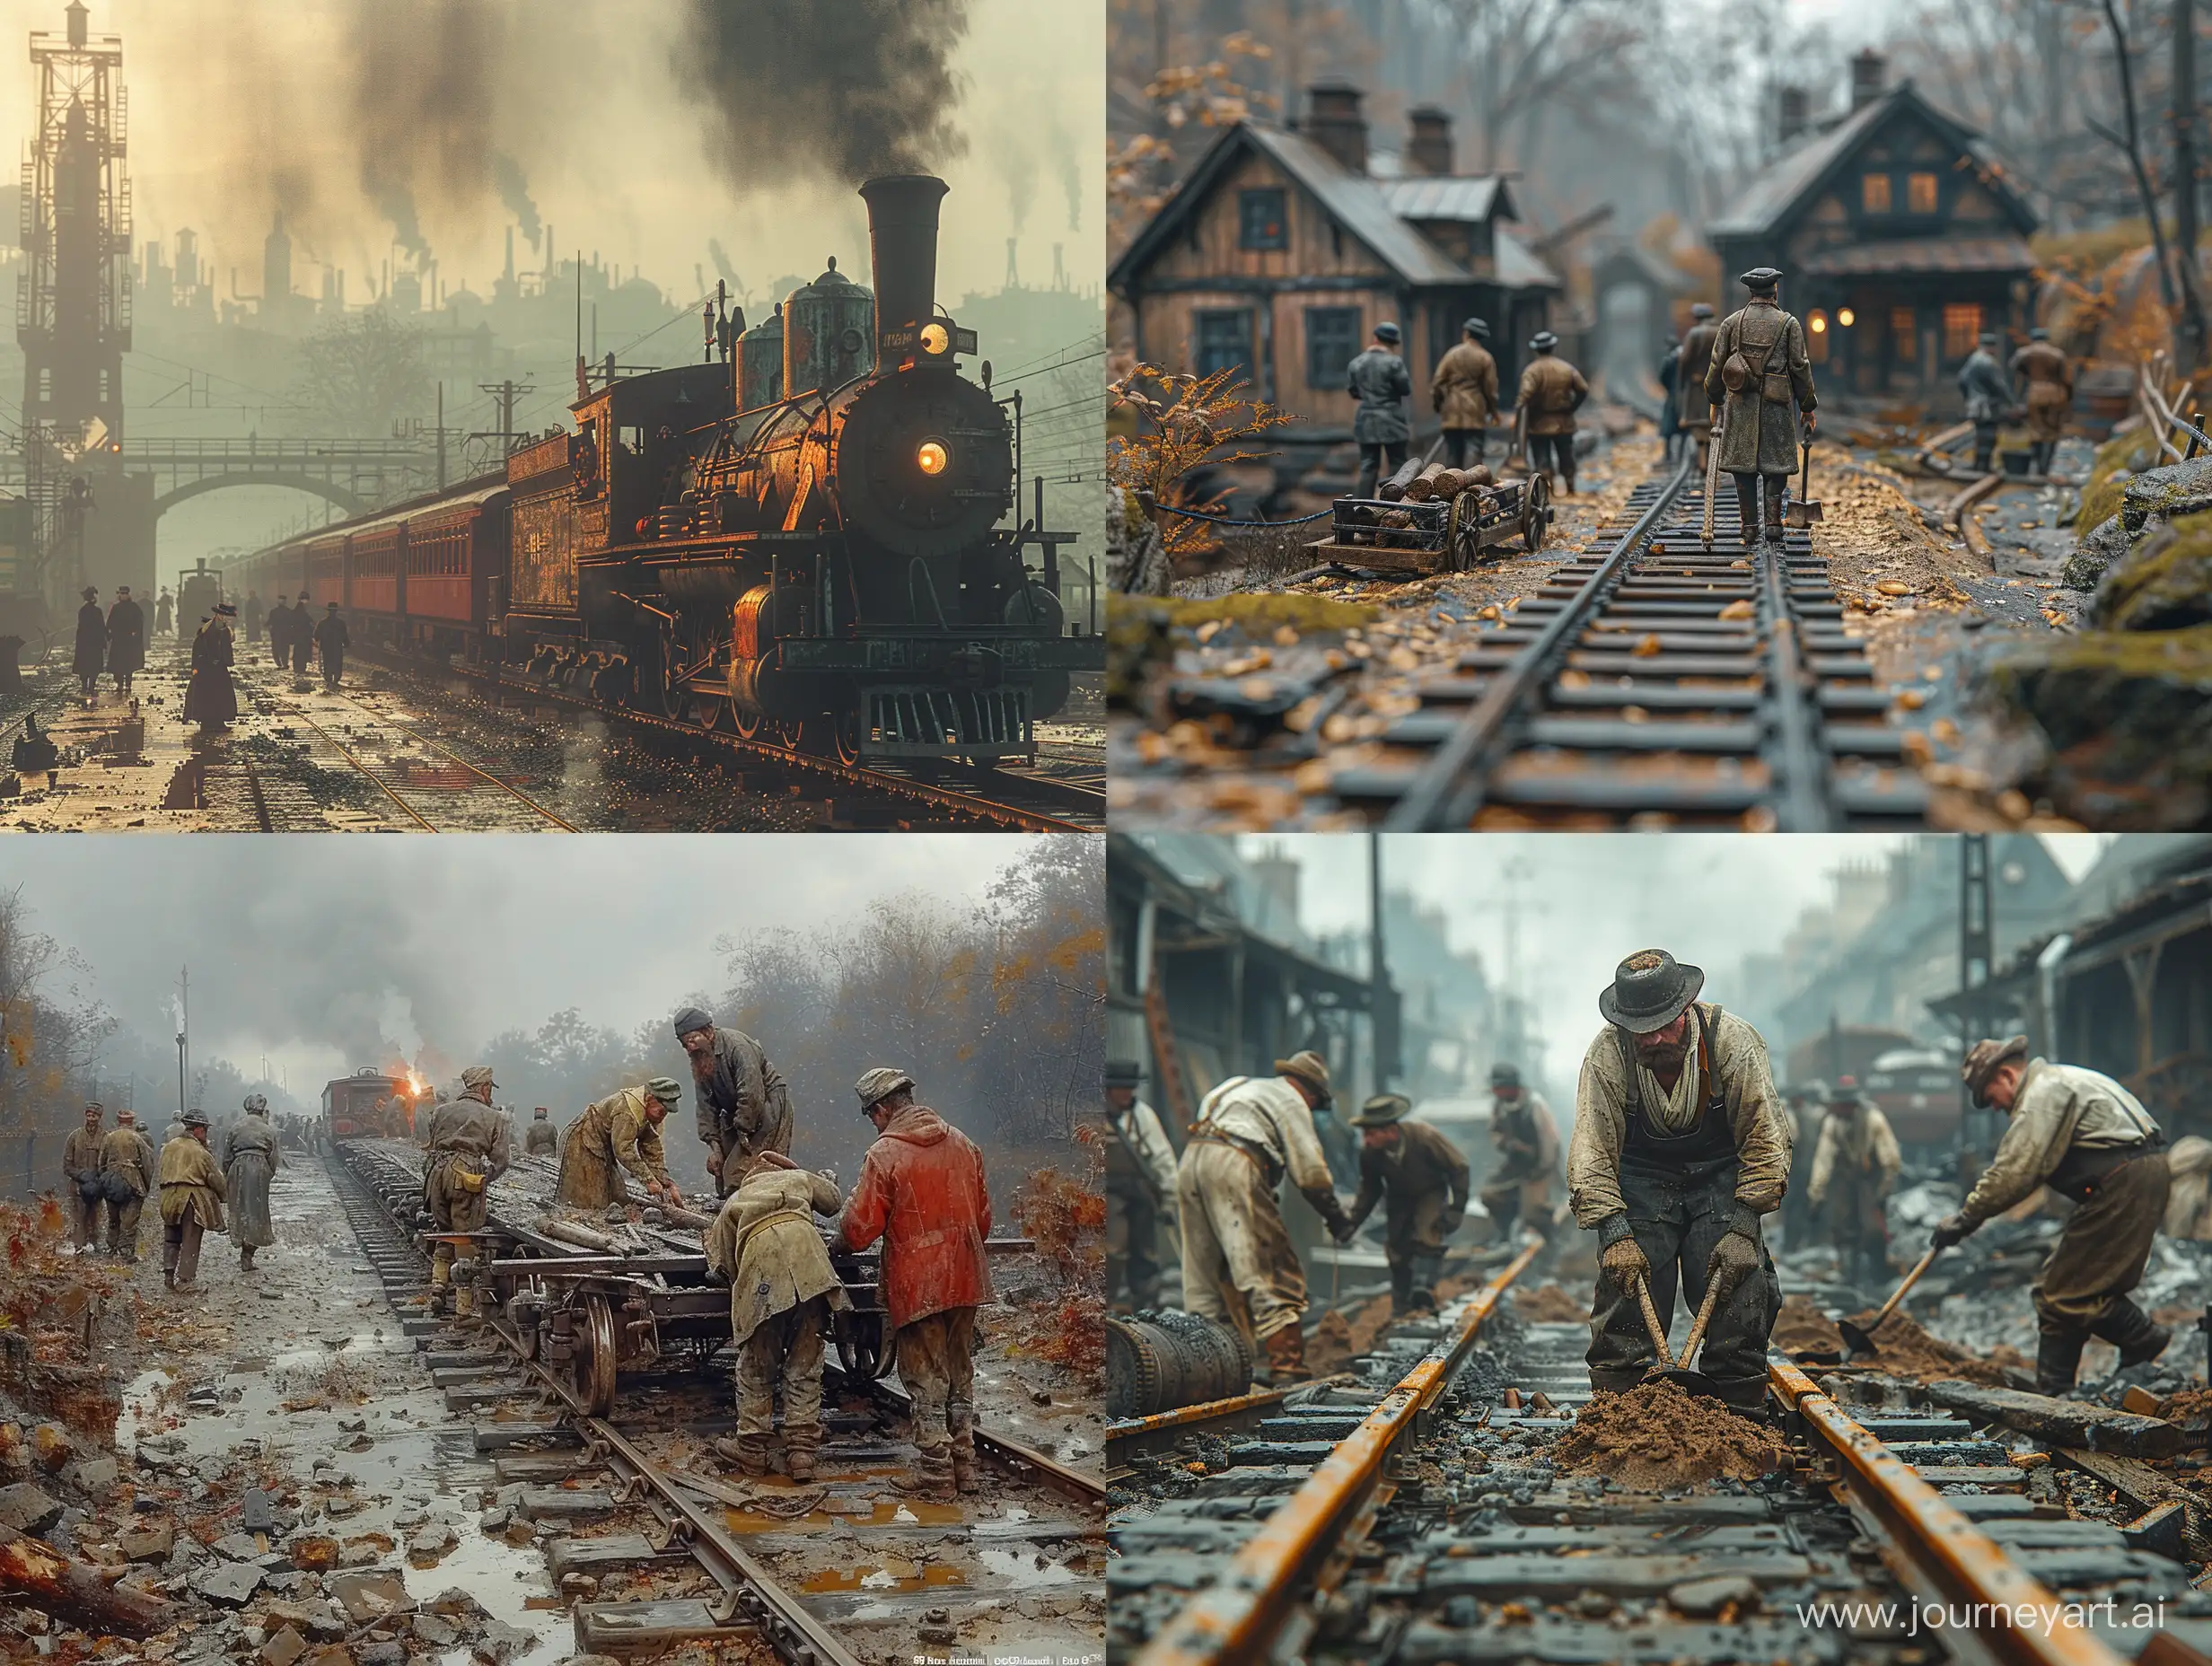 Authentic-Railway-Workers-of-1845-Engaged-in-Daily-Labor-Amidst-Scenic-Realism